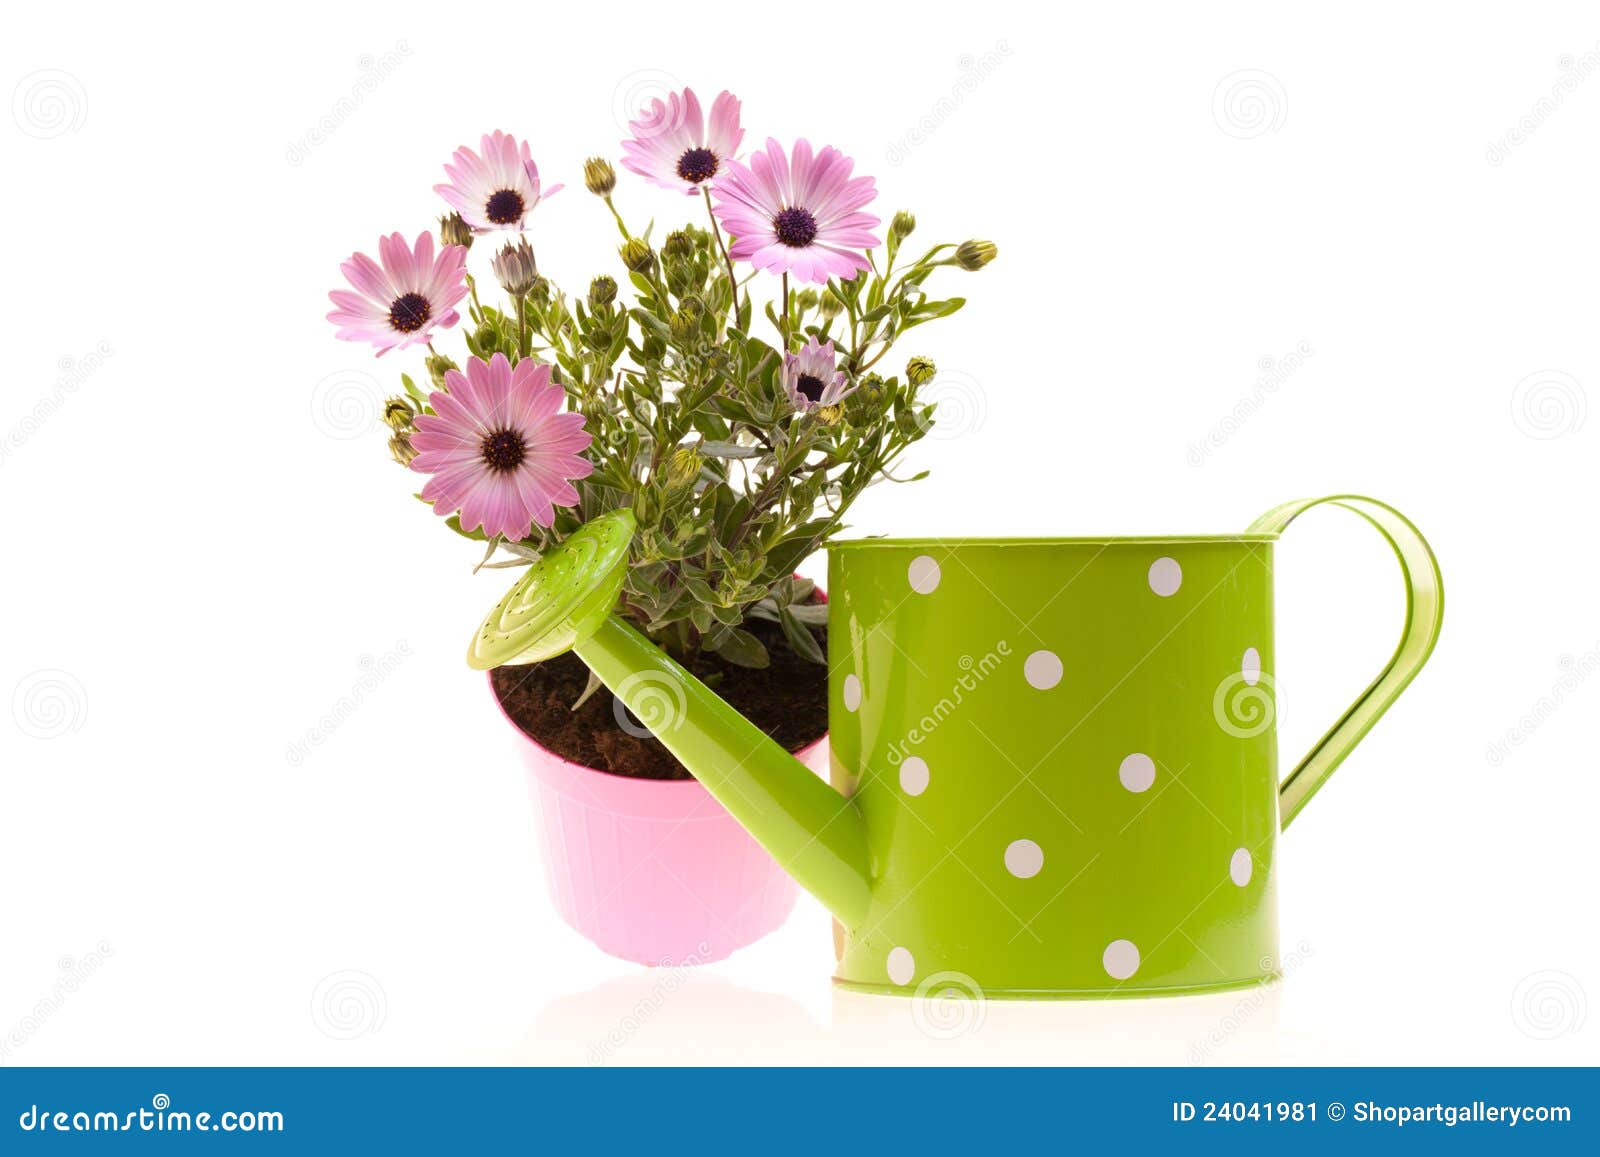 Pot With African Daisies And Watering Can Stock Image - Image of ...